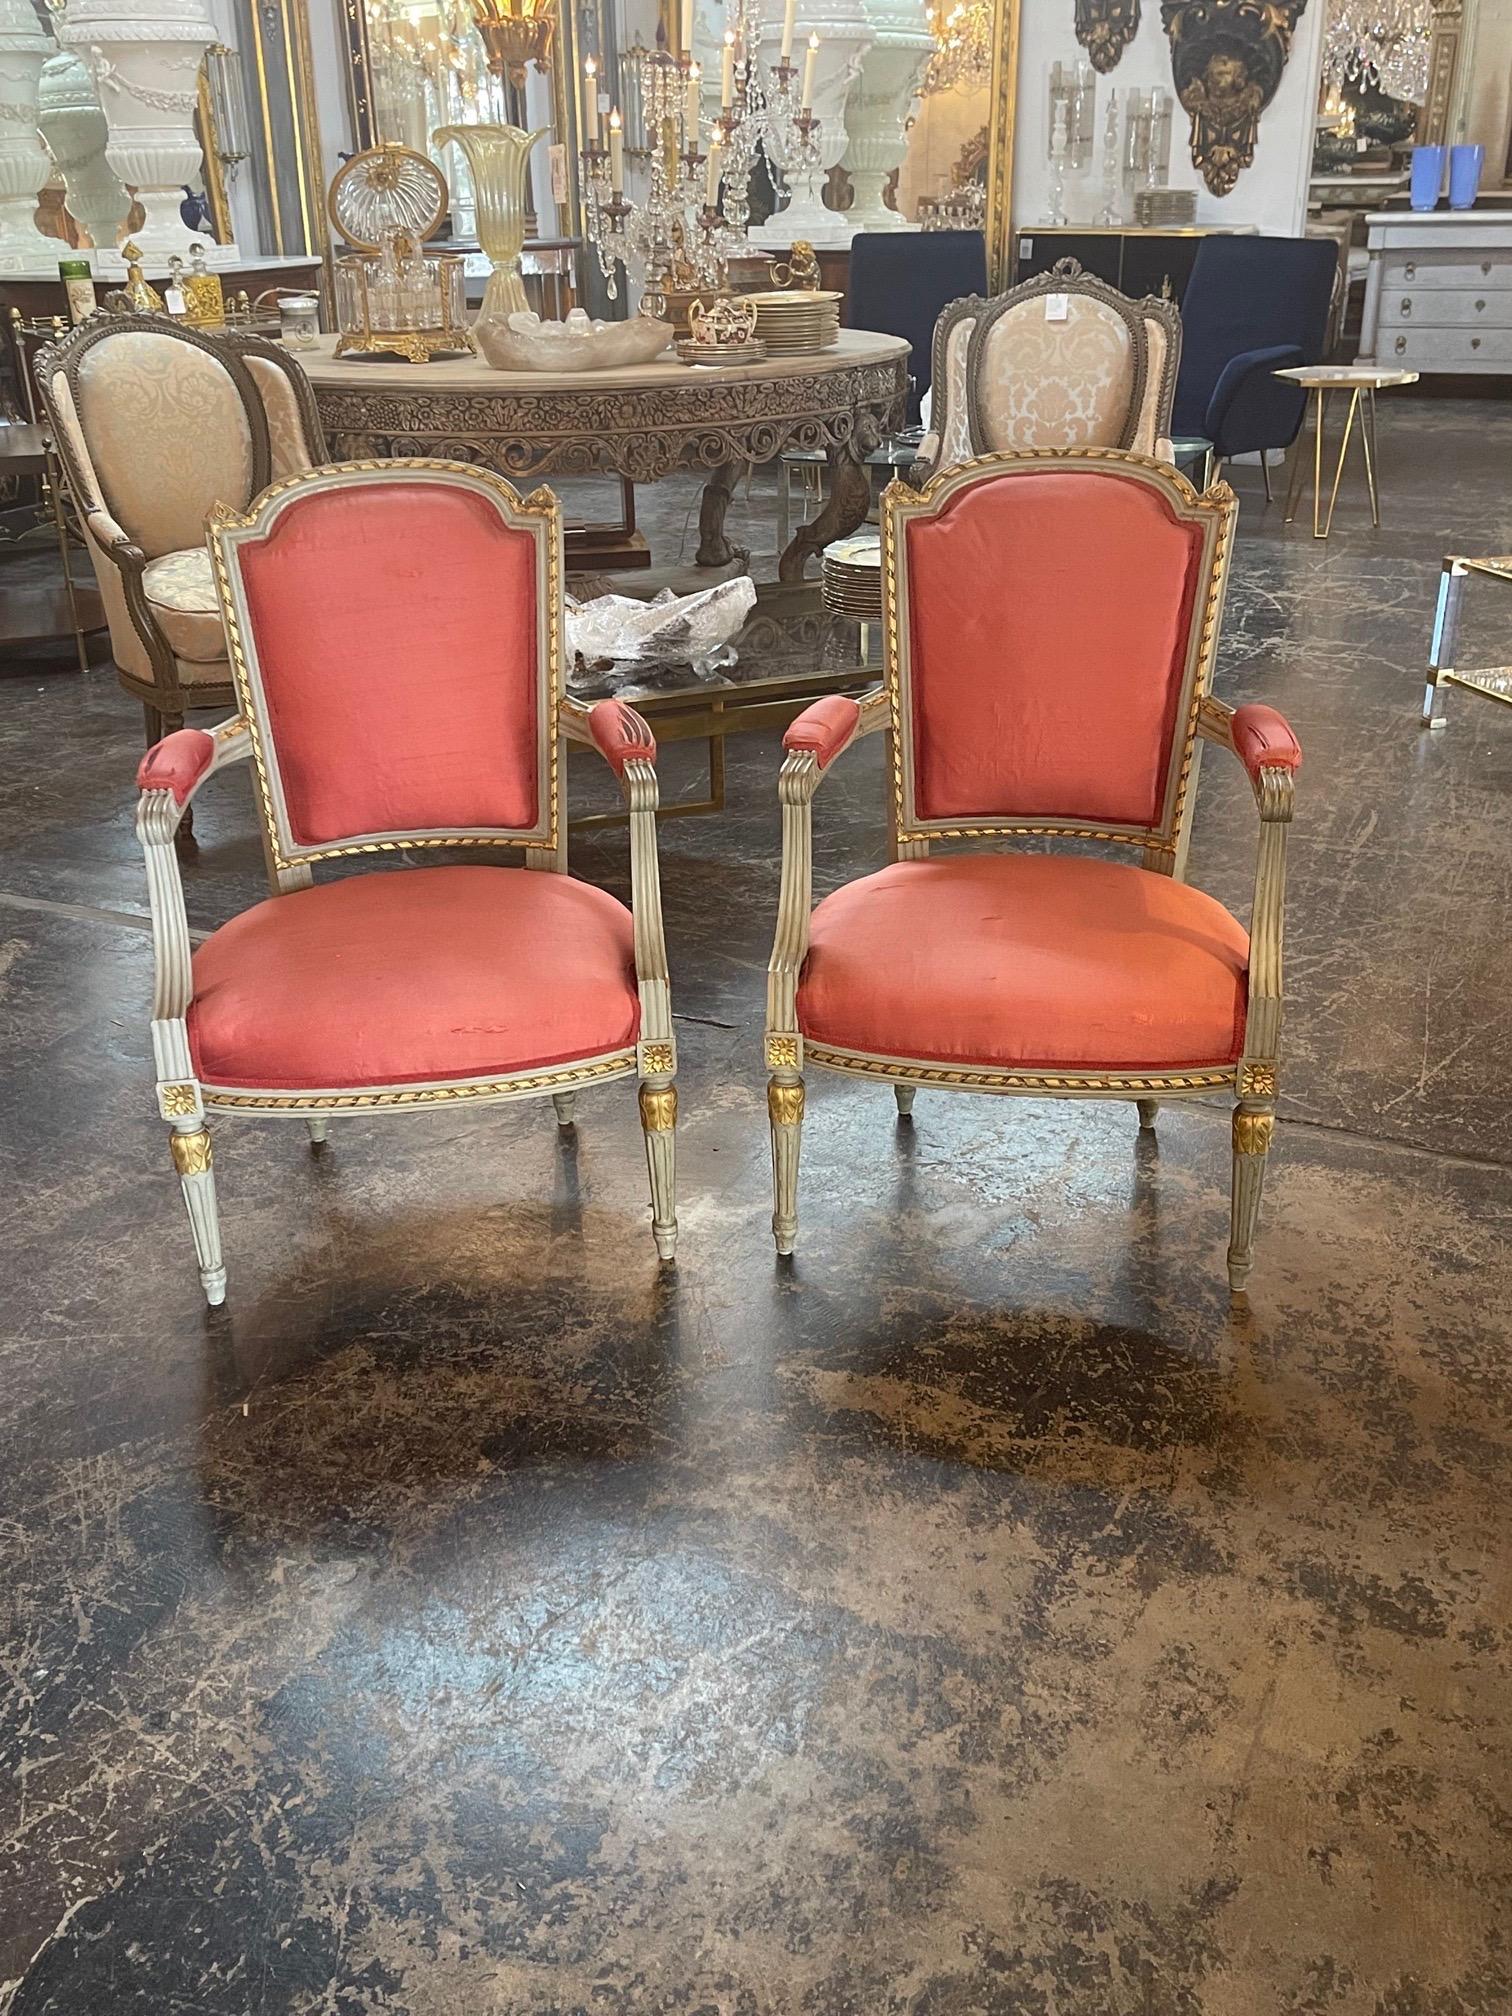 Lovely pair of 19th century French Louis XVI carved and painted armchairs. Beautifully carved and painted in green and gold. And the chairs are upholstered in a beautiful pink silk fabric. Gorgeous!